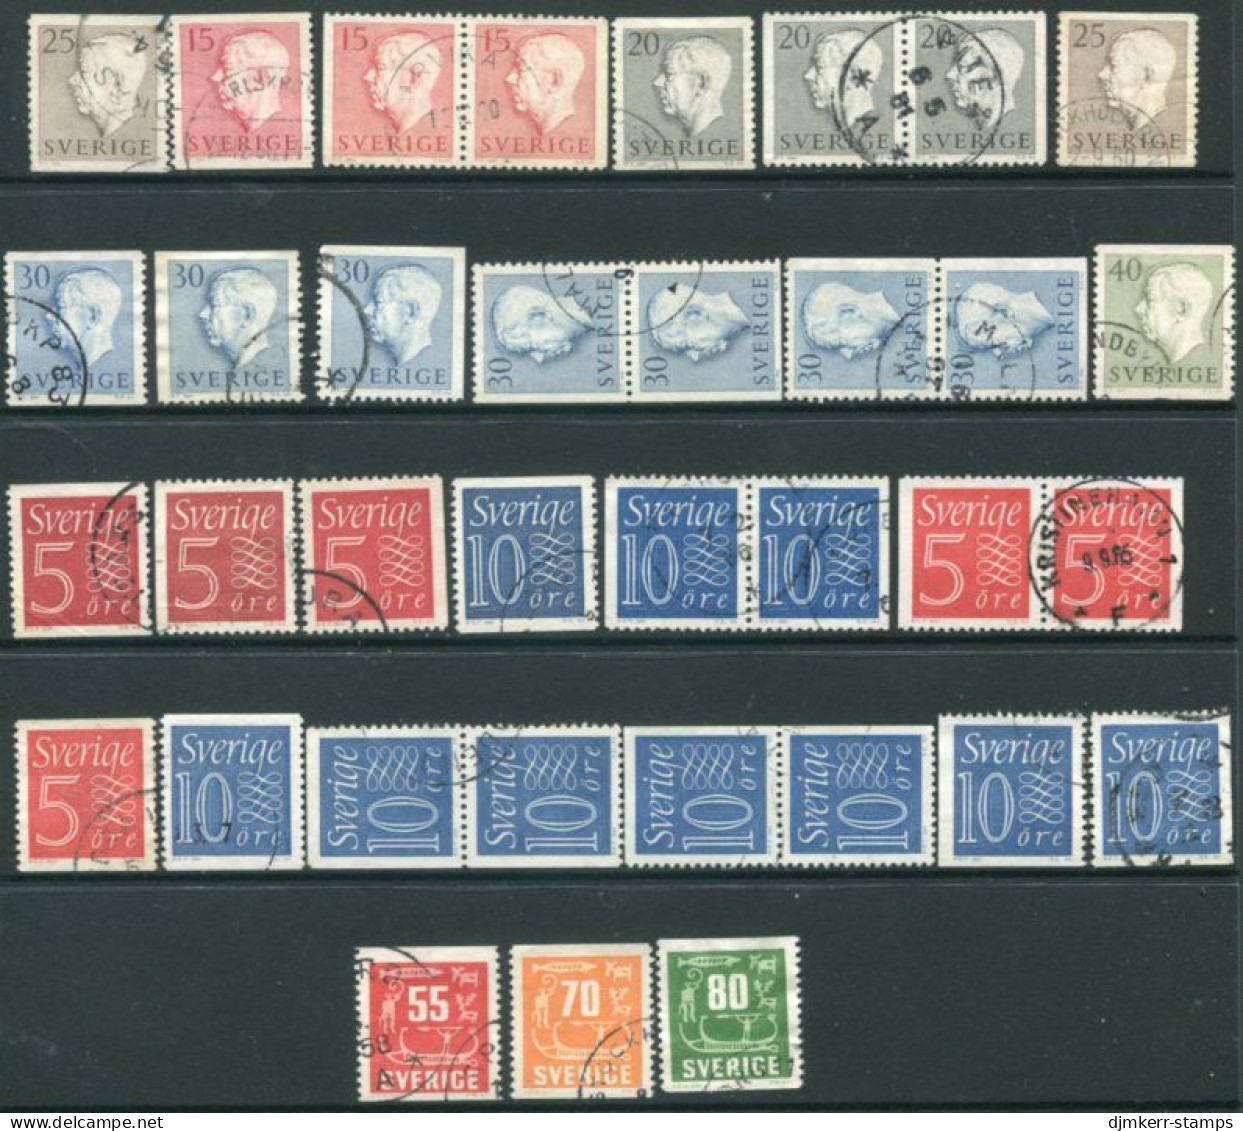 SWEDEN 1957 Complete Definitive Issues Used.  Michel 423-433 - Gebraucht